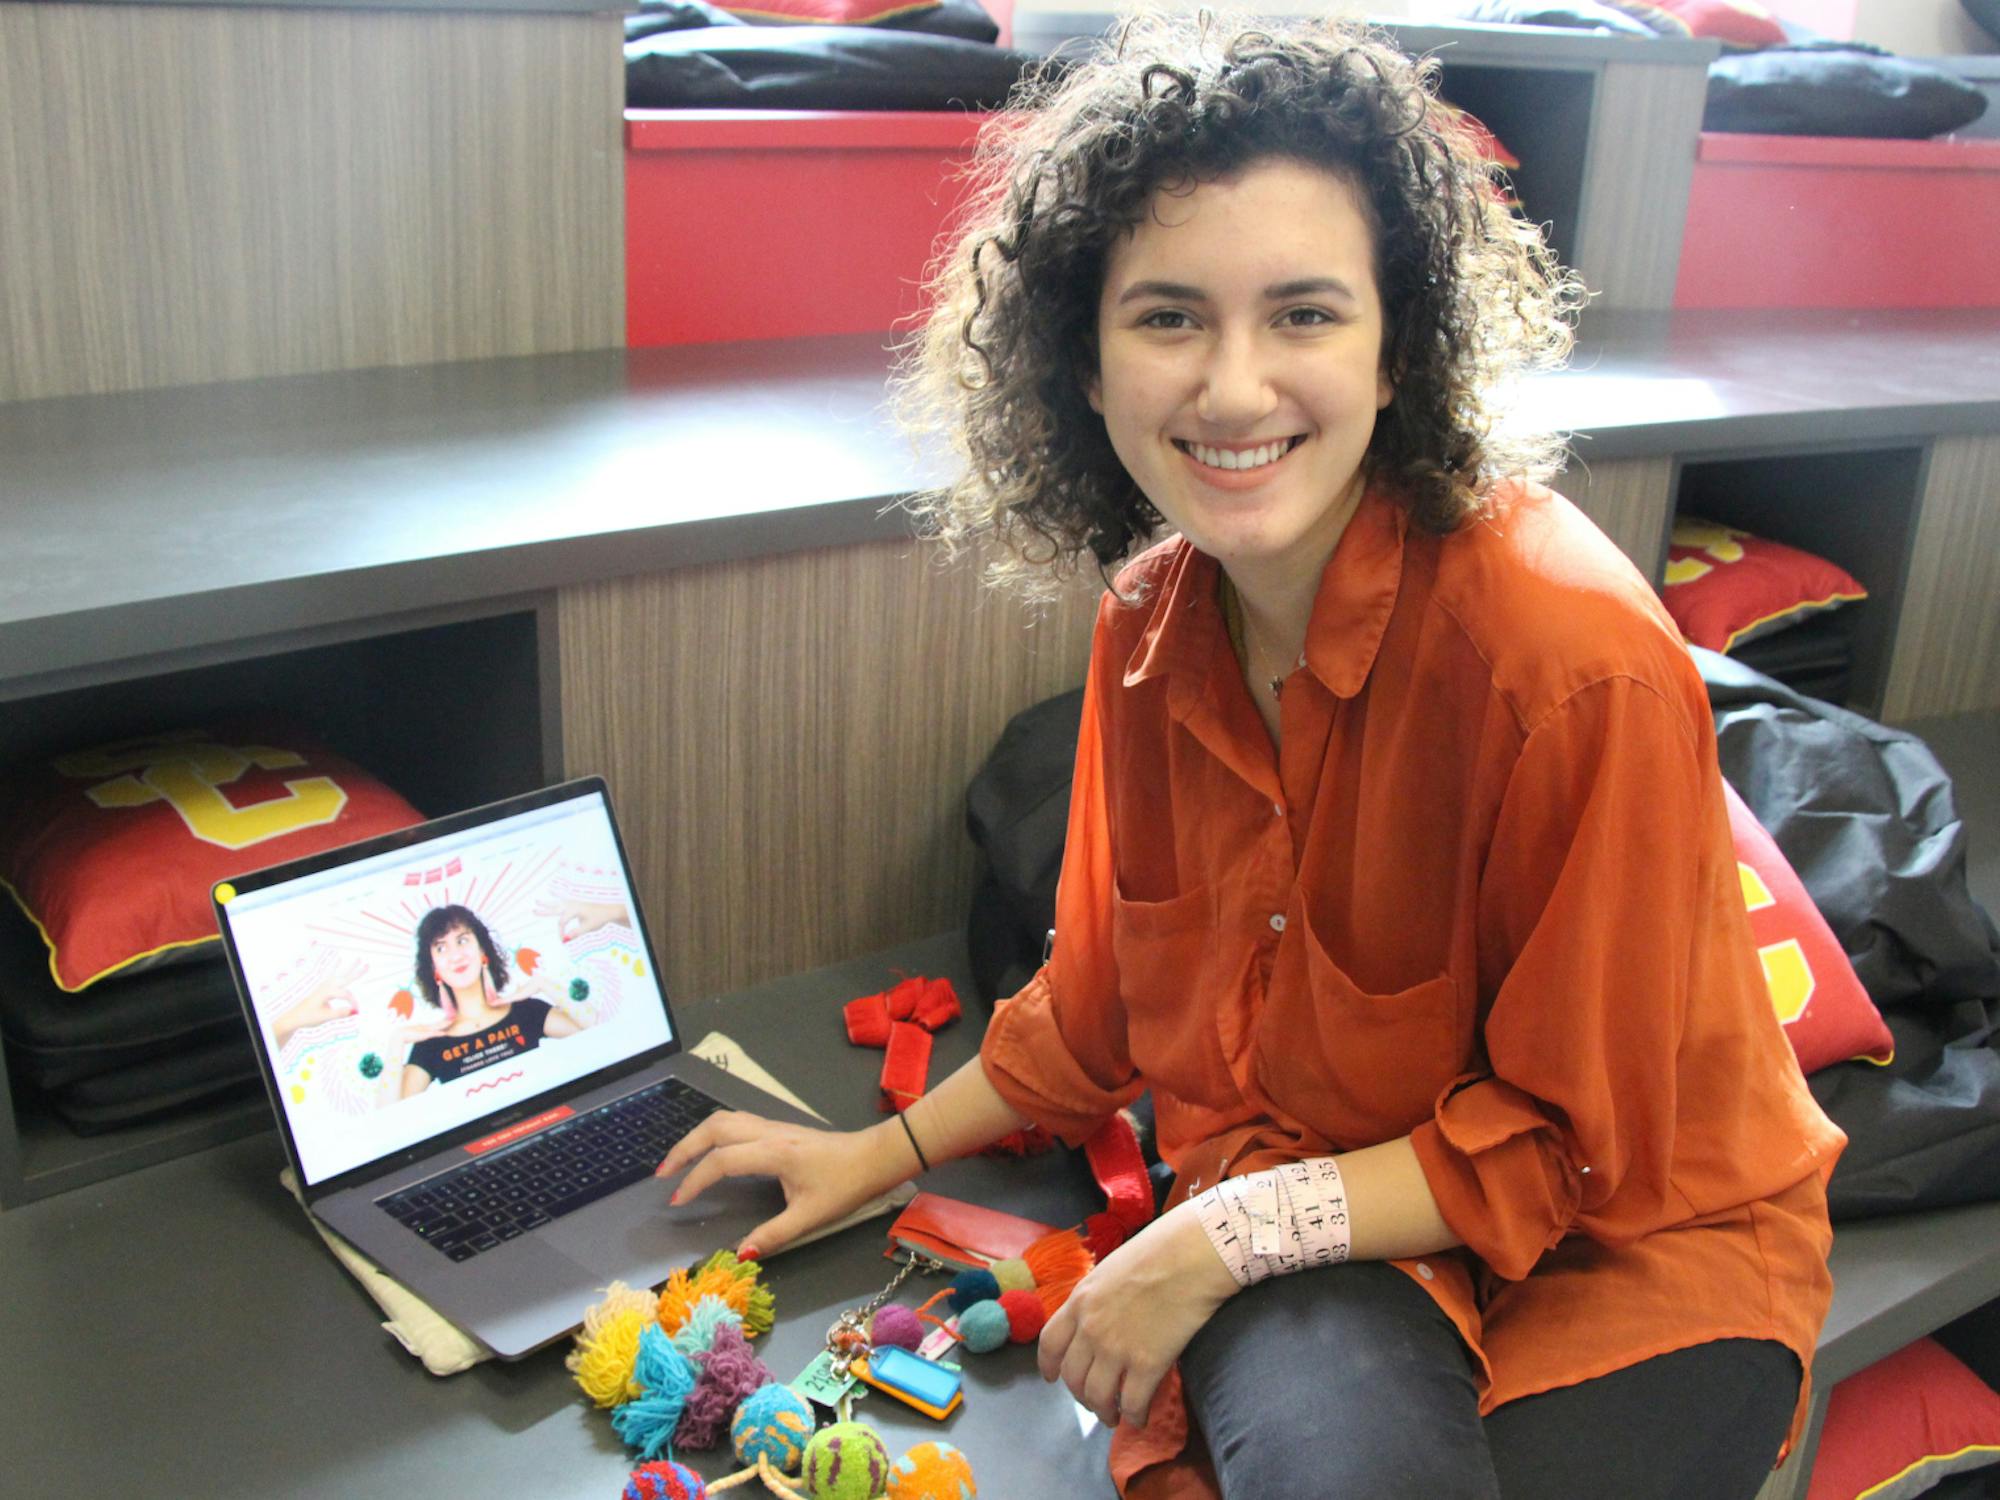 A young woman smiles next to her laptop and a pile of pom poms